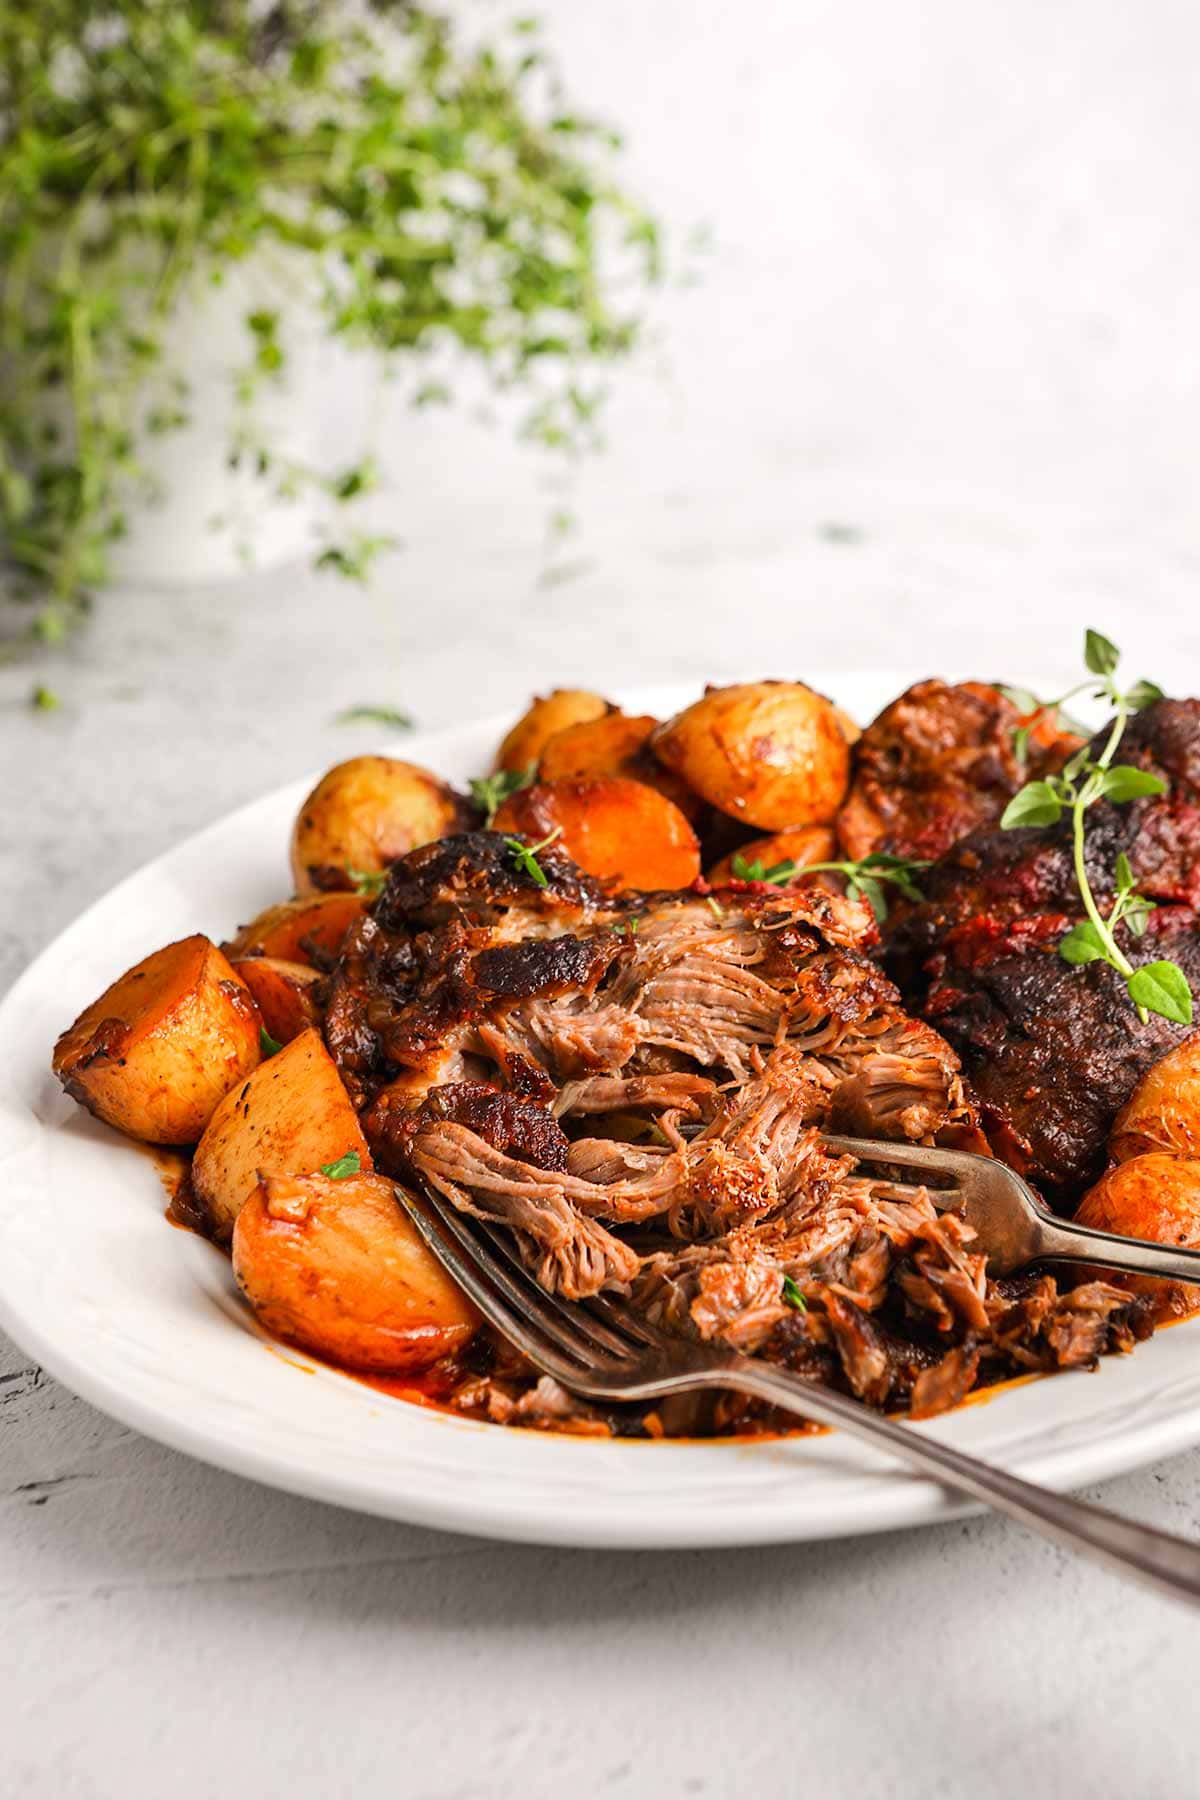 Irish Guinness Roast Lamb with potatoes on serving plate with forks shredding